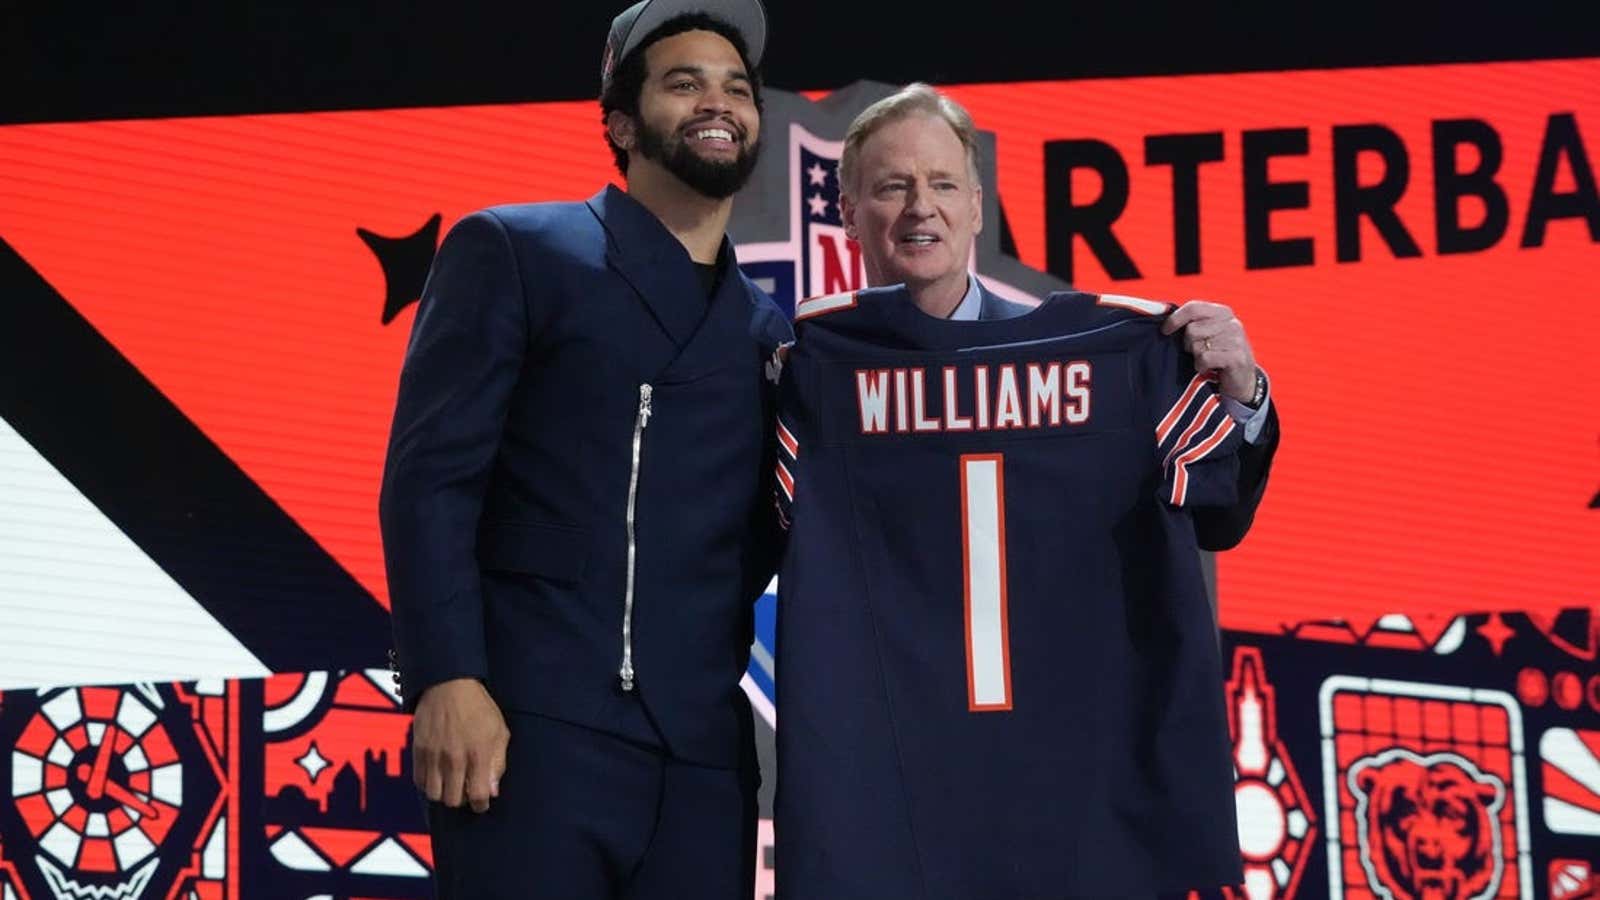 Image for Caleb Williams joins Bears as QBs go 1-2-3 at NFL draft